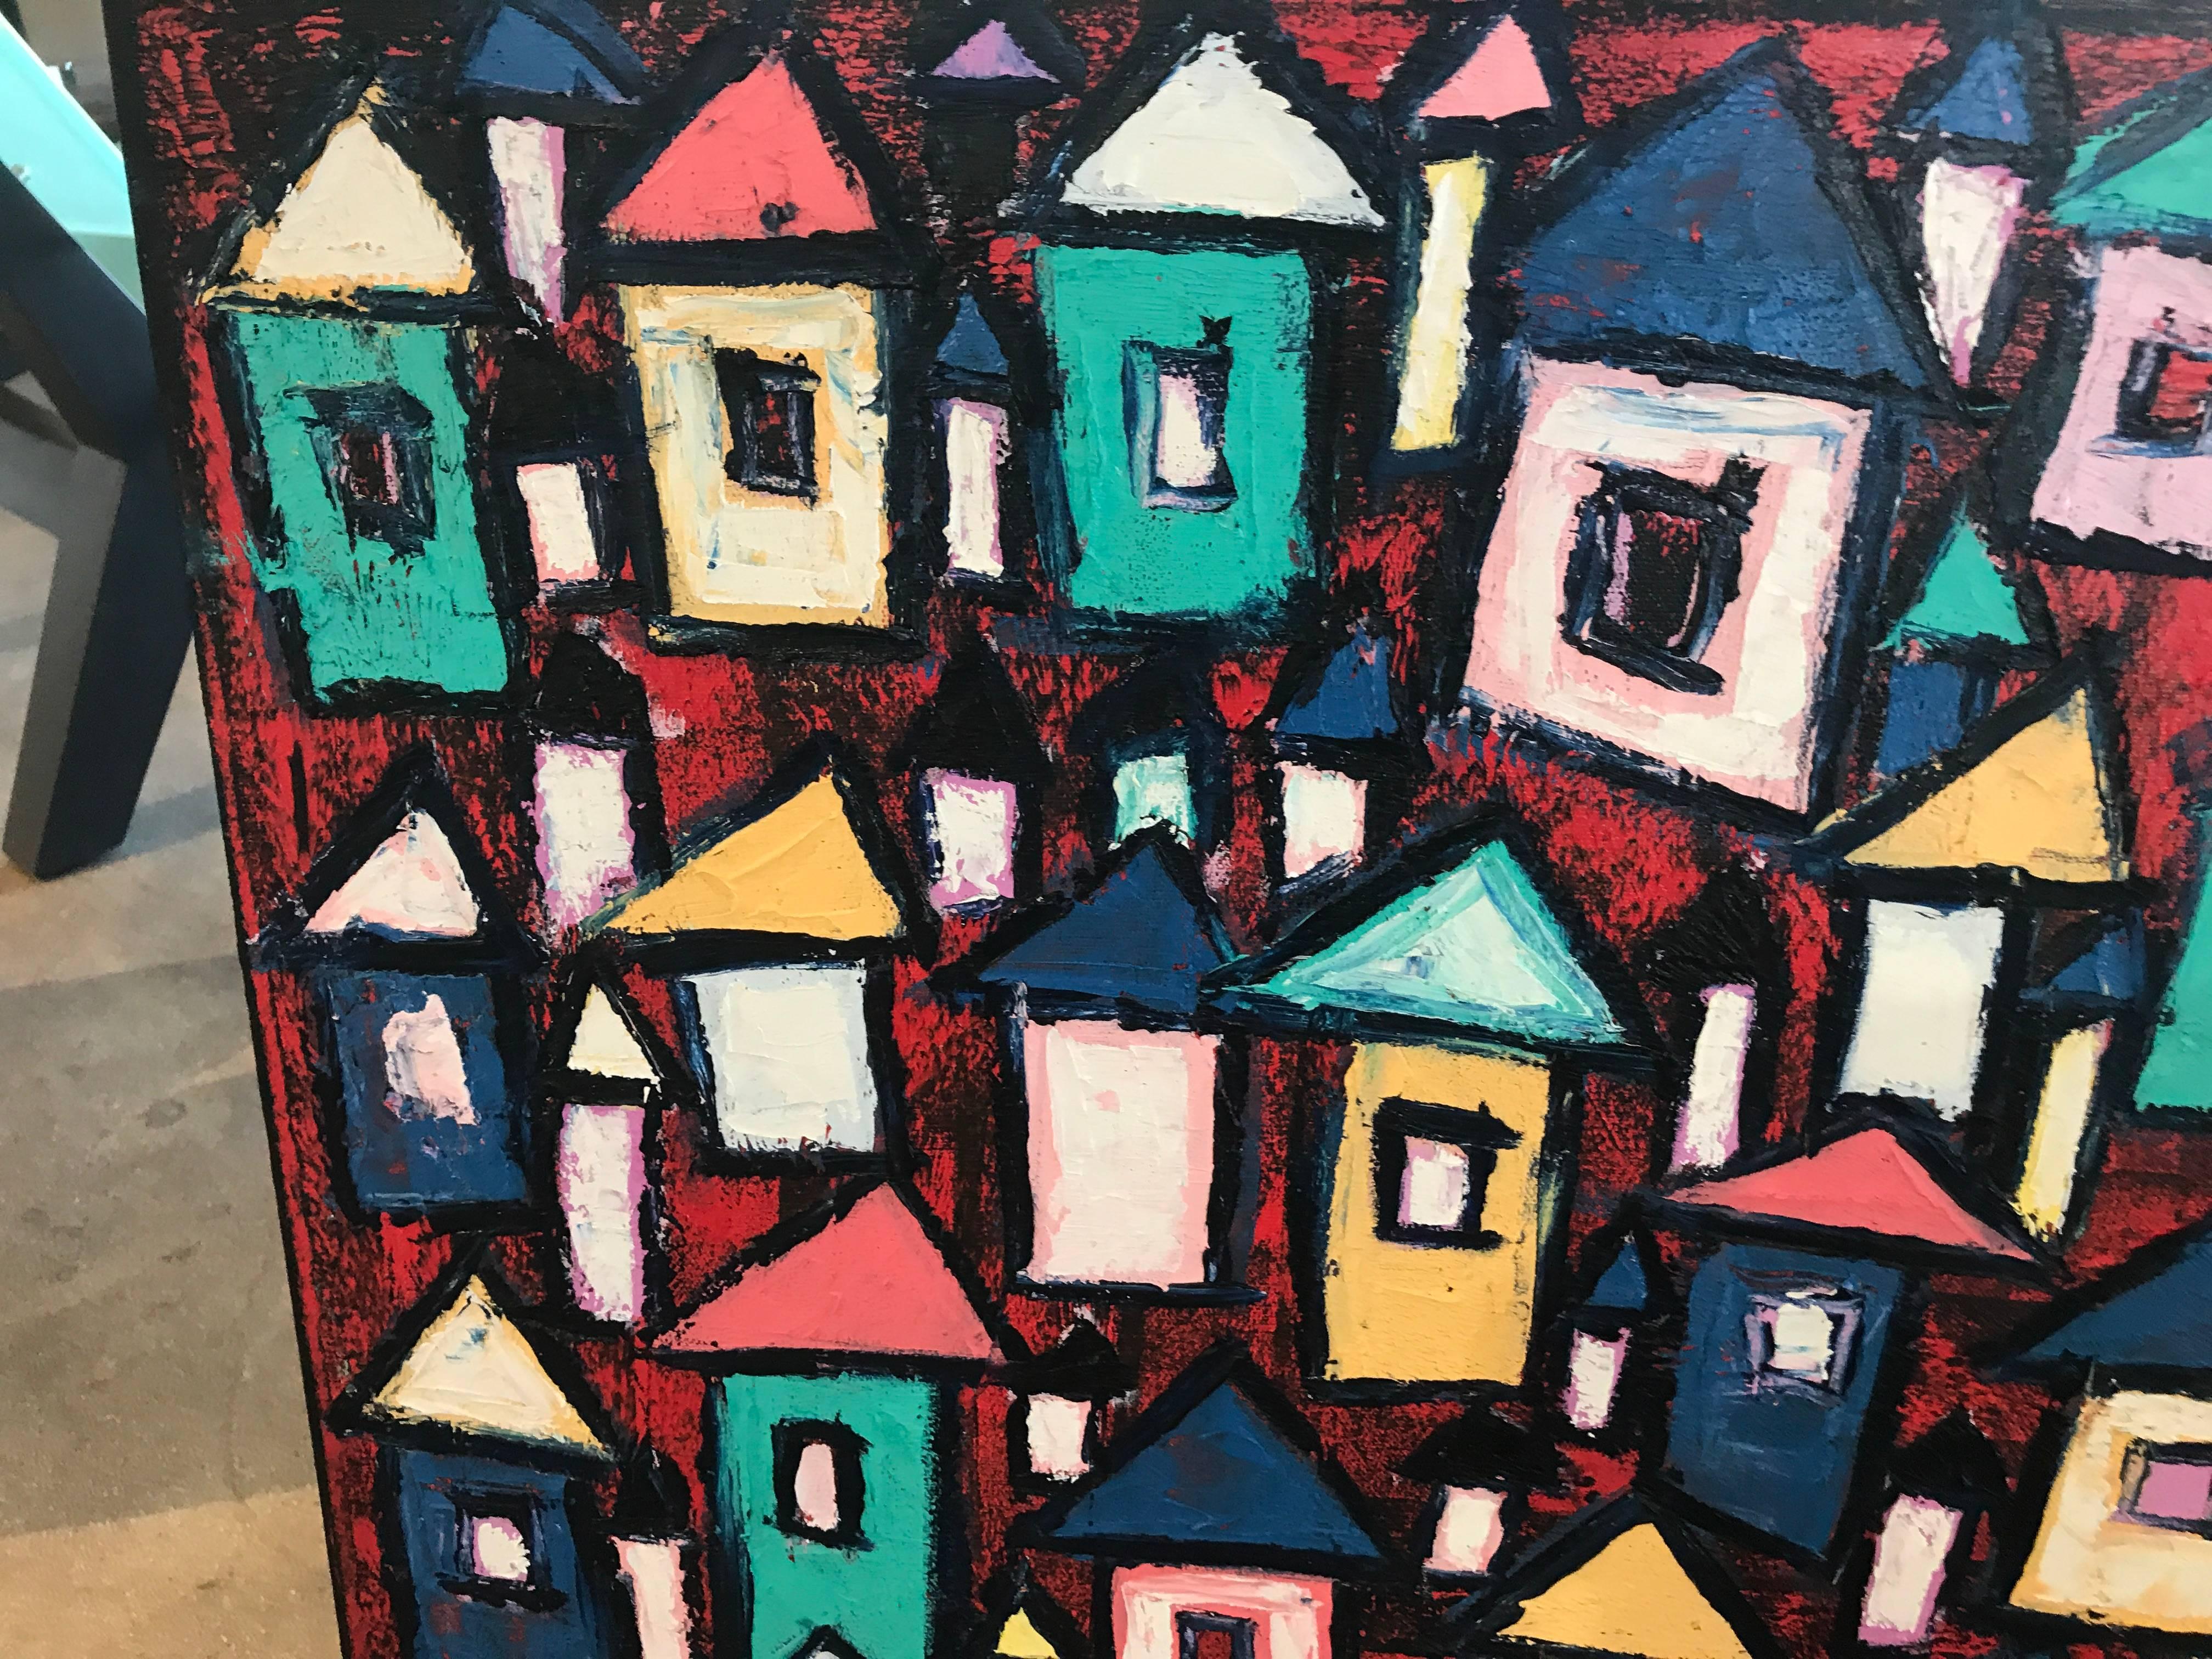 Rahmon Olugunna is a noted Nigerian artist. This painting is titled dark village and is vibrant and colorful.
A brief statement follows:
Rahmon Olugunna’s work is said to ‘evoke the fertile artistic landscape of Oshogbo’s cultural heritage and